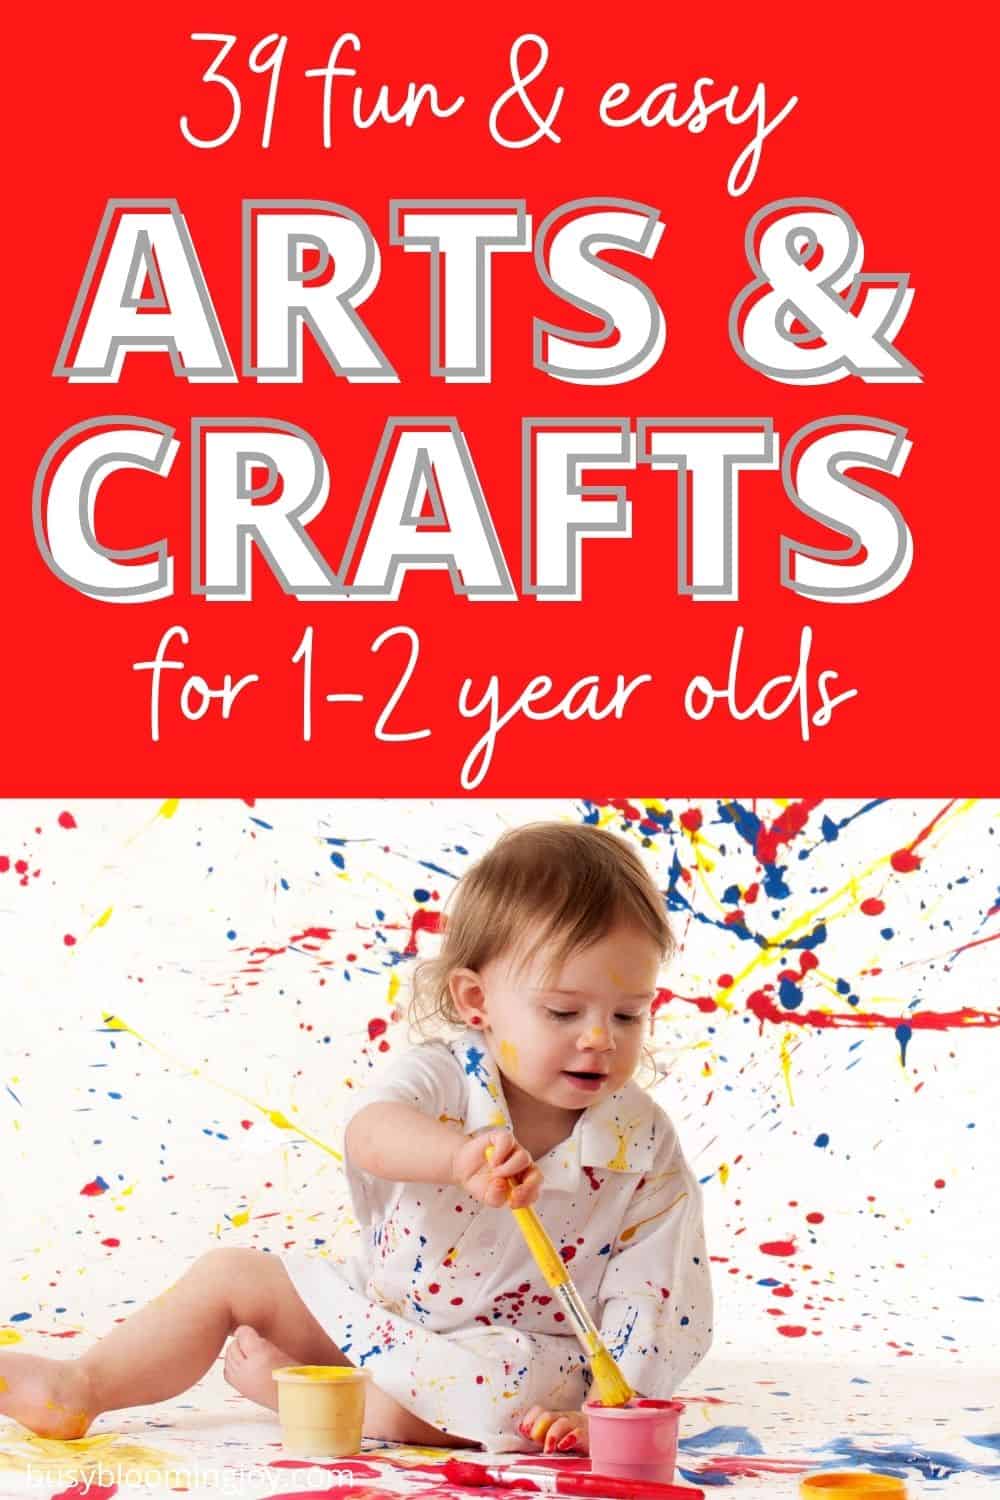 39 Fun & easy arts projects & crafts for 1 – 2 year olds